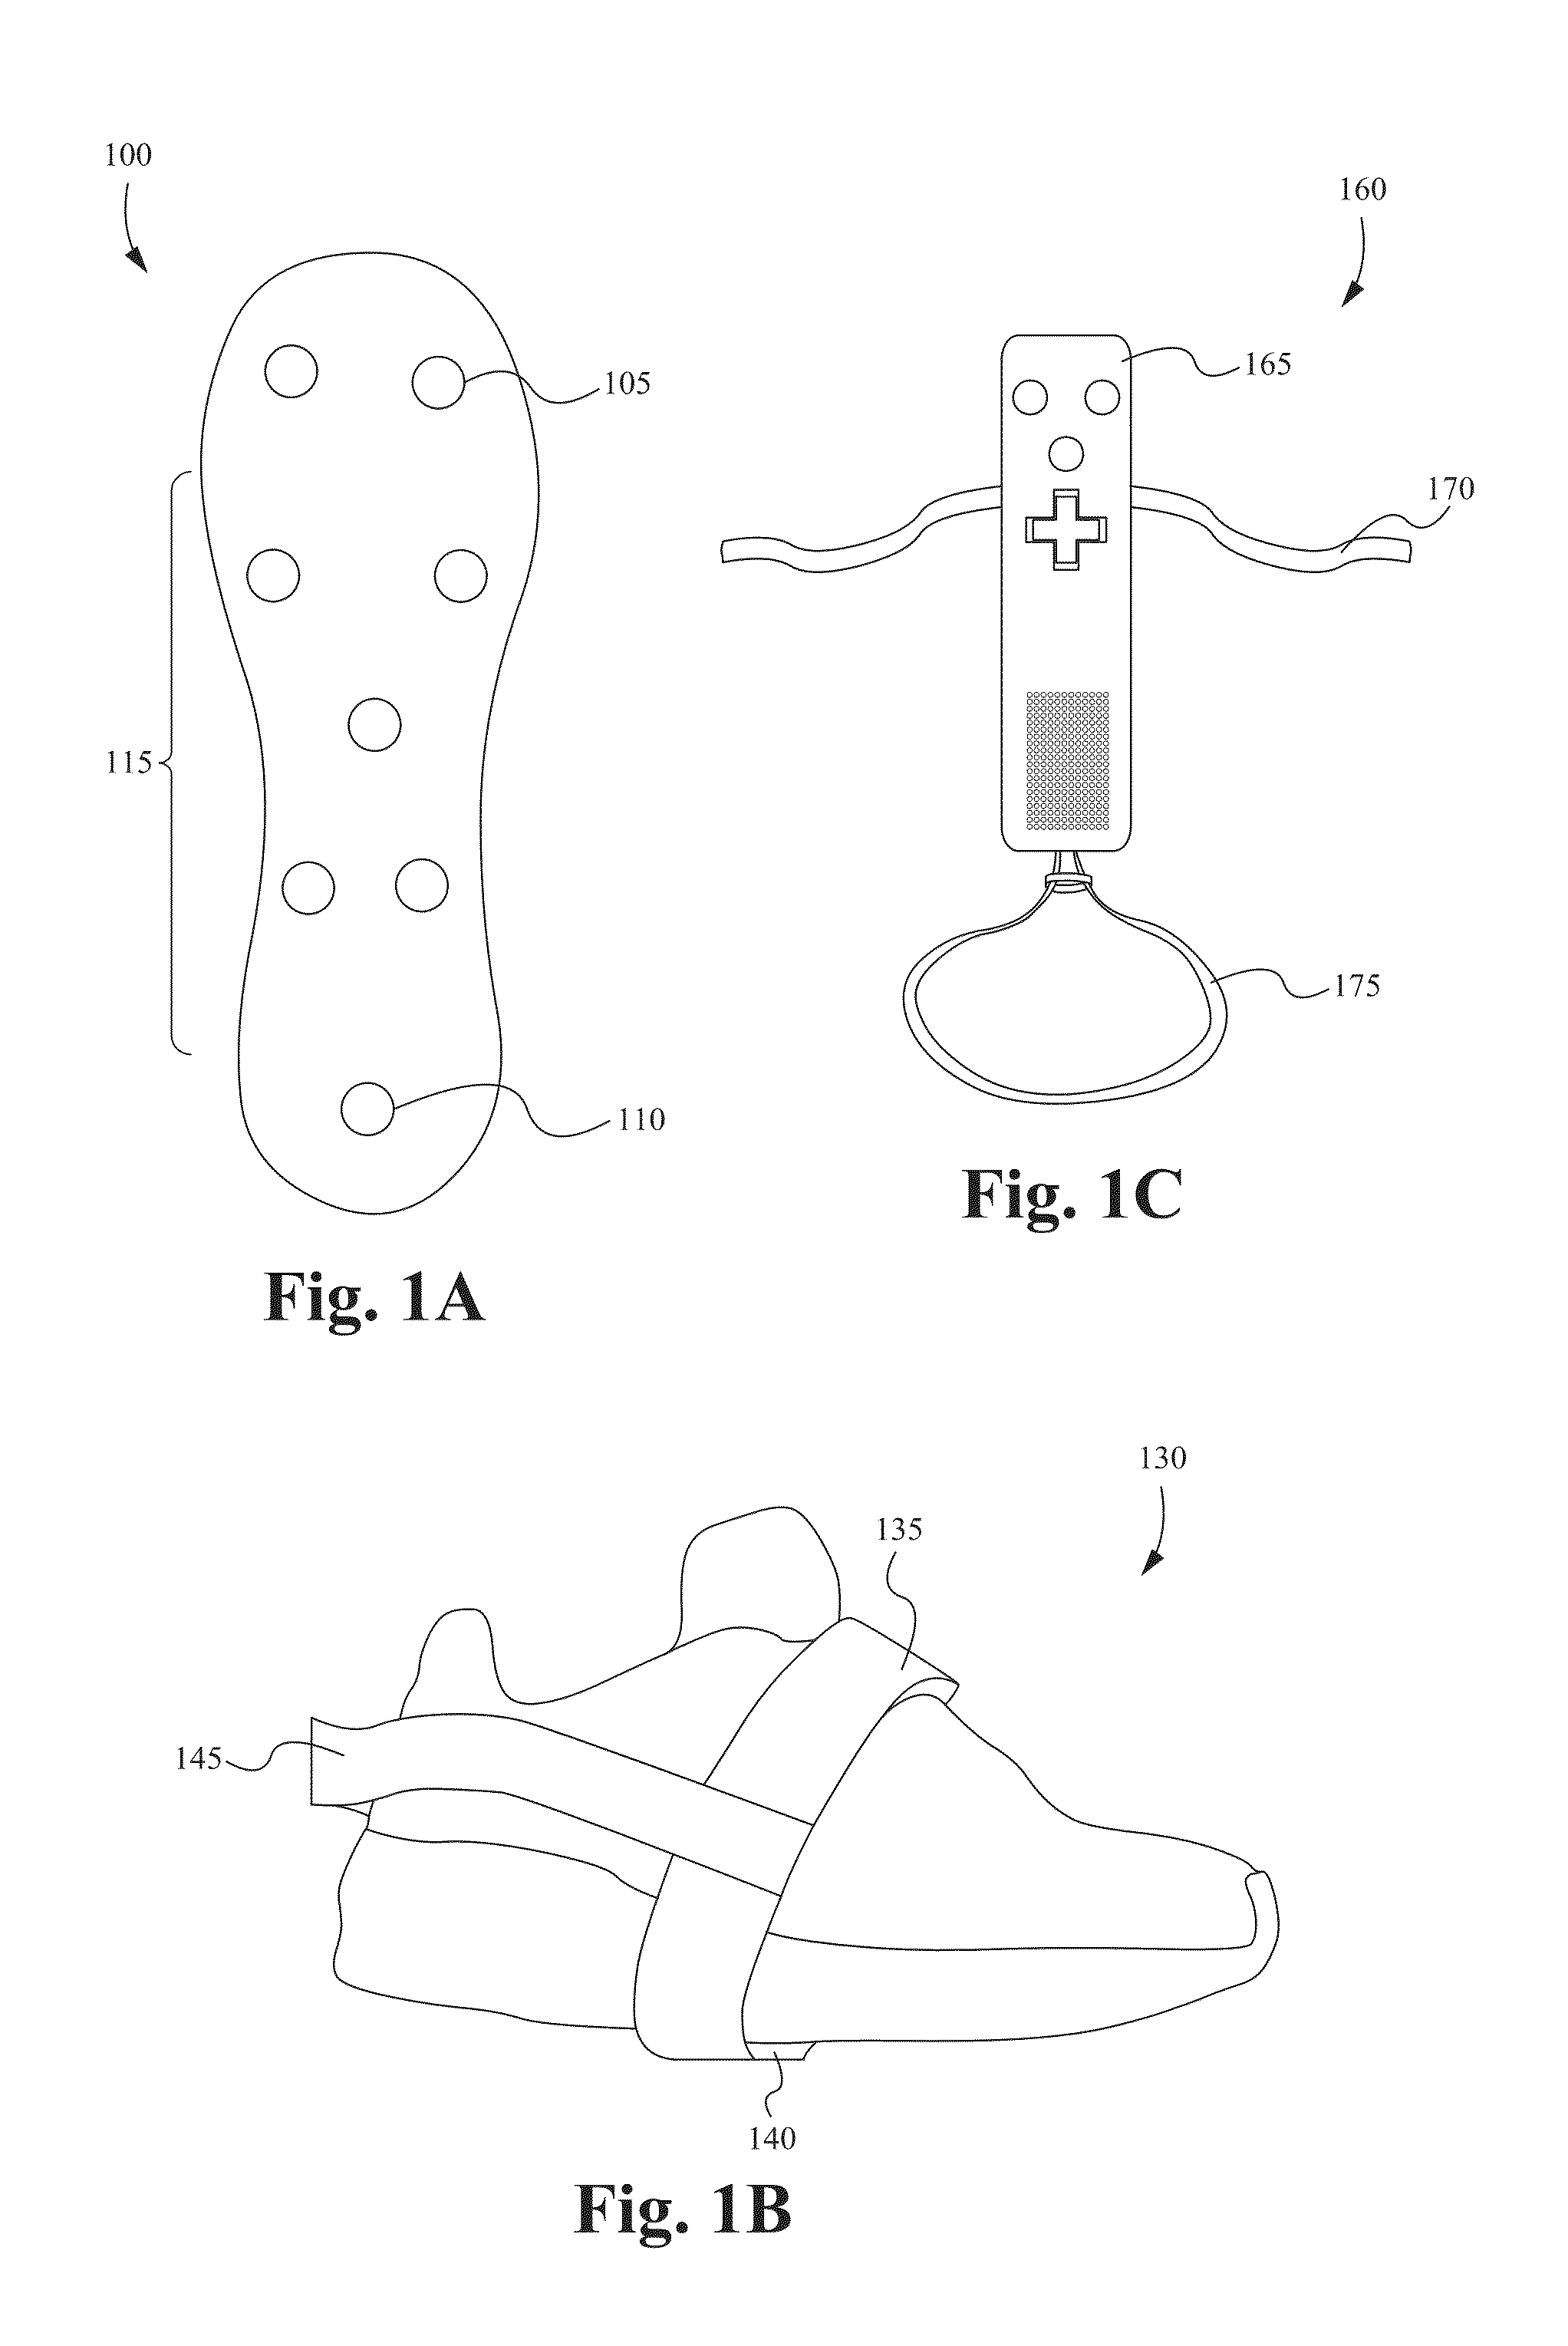 Systems for and methods of detecting and reproducing motions for video games